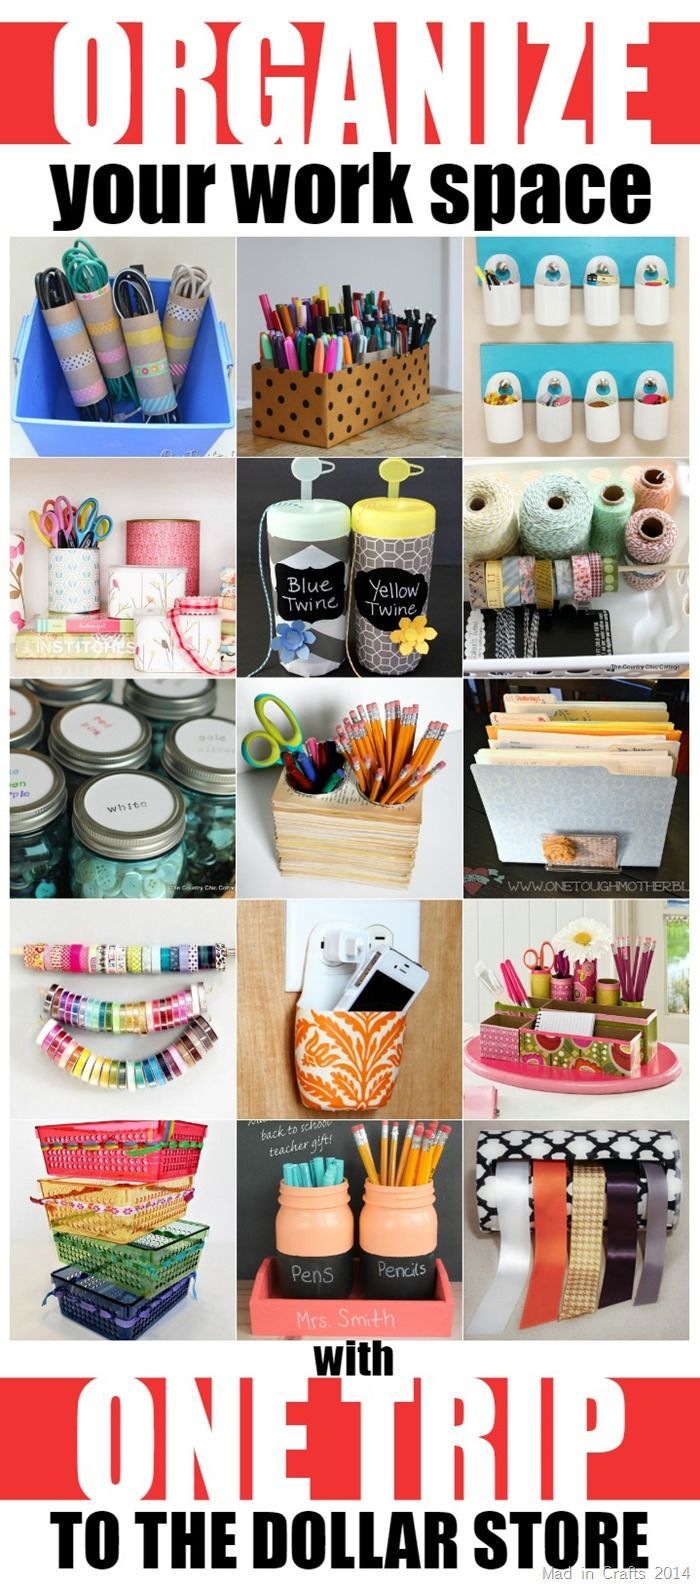 Organize Your Work Space with One Trip to the Dollar Store – Mad in